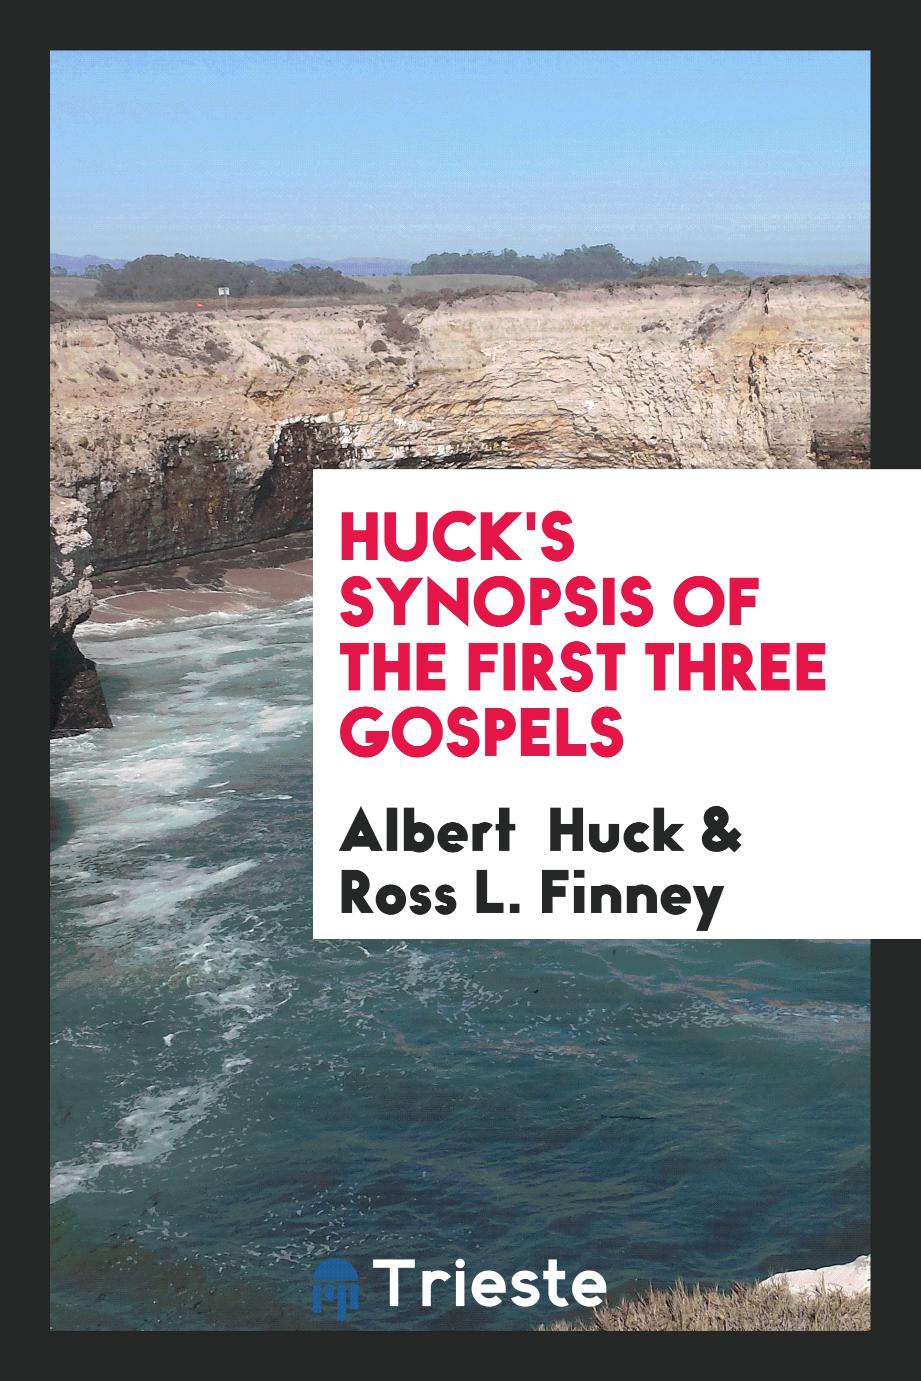 Huck's Synopsis of the First Three Gospels